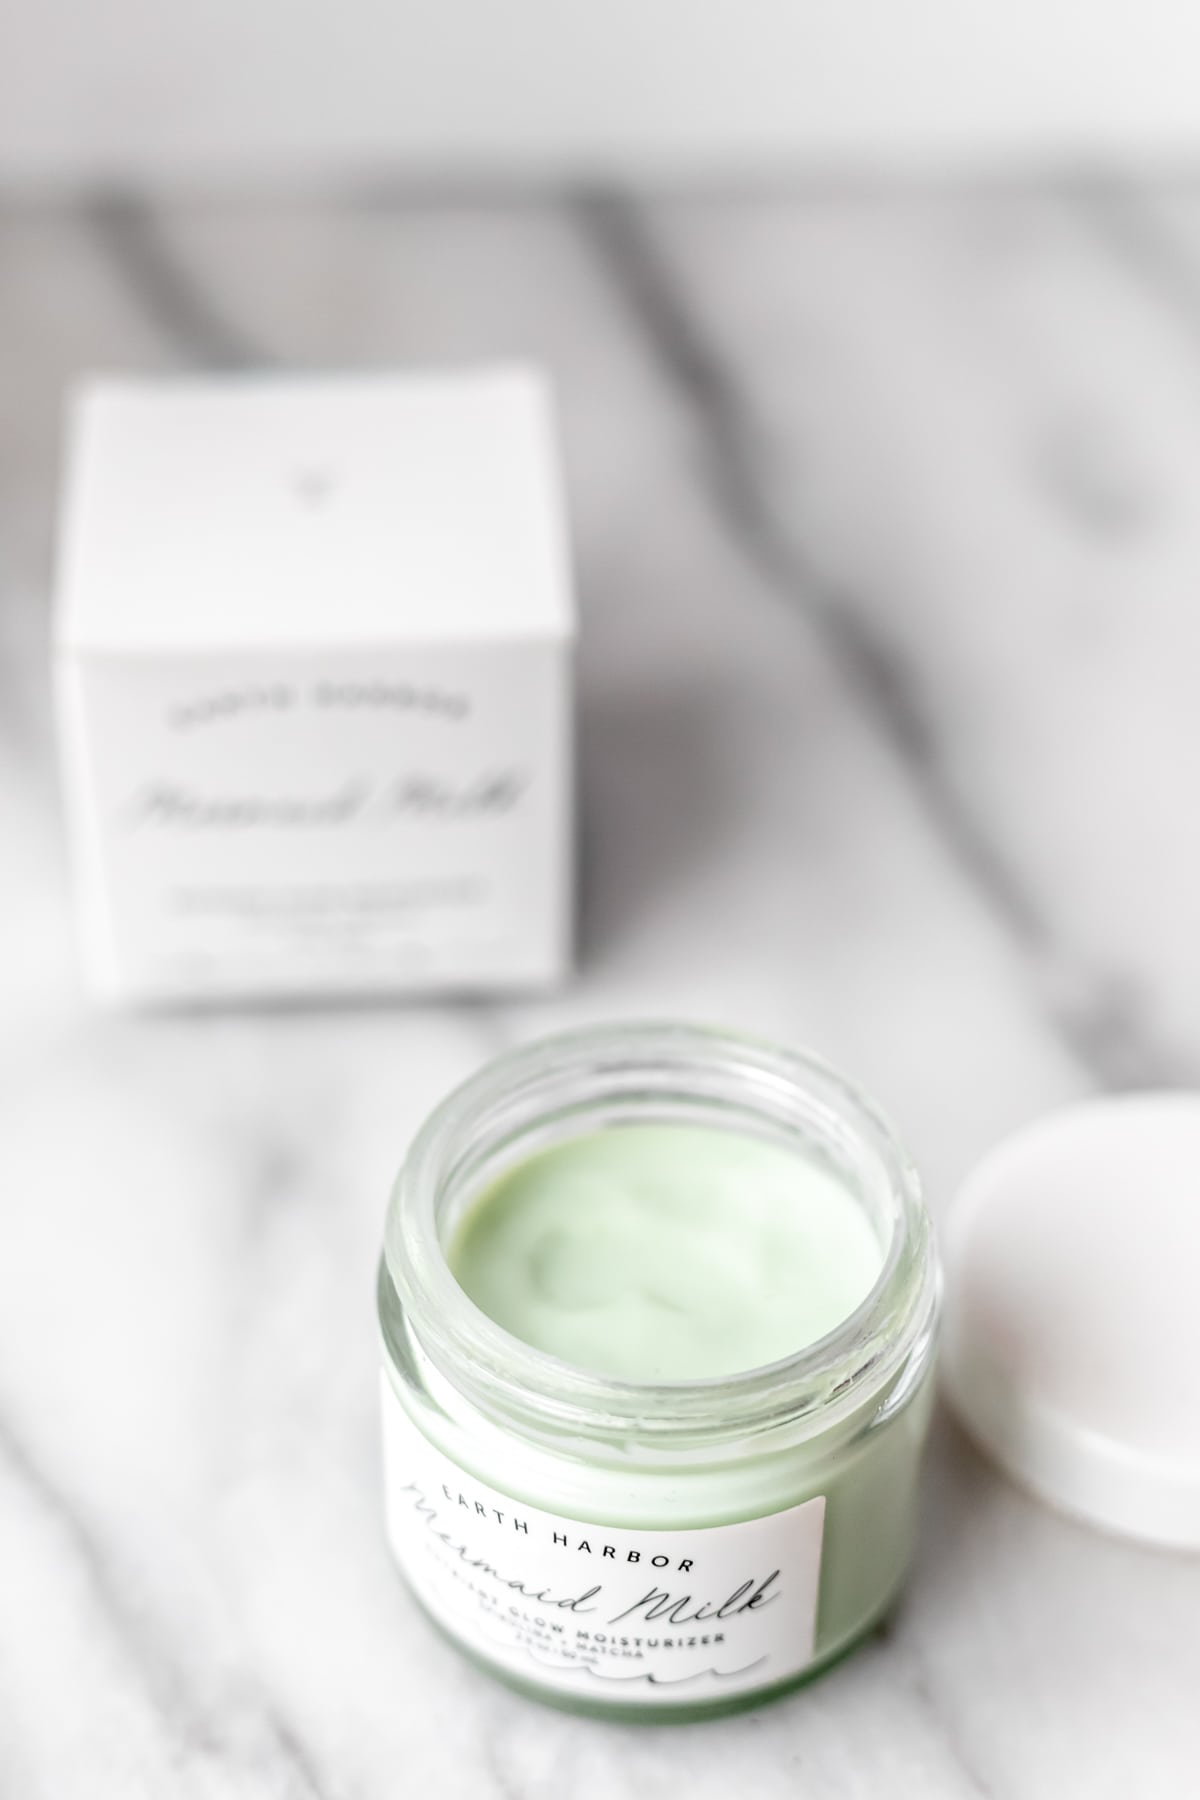 An opened jar of Earth Harbor Mermaid Milk showing the light green cream inside with the lid and box around it.